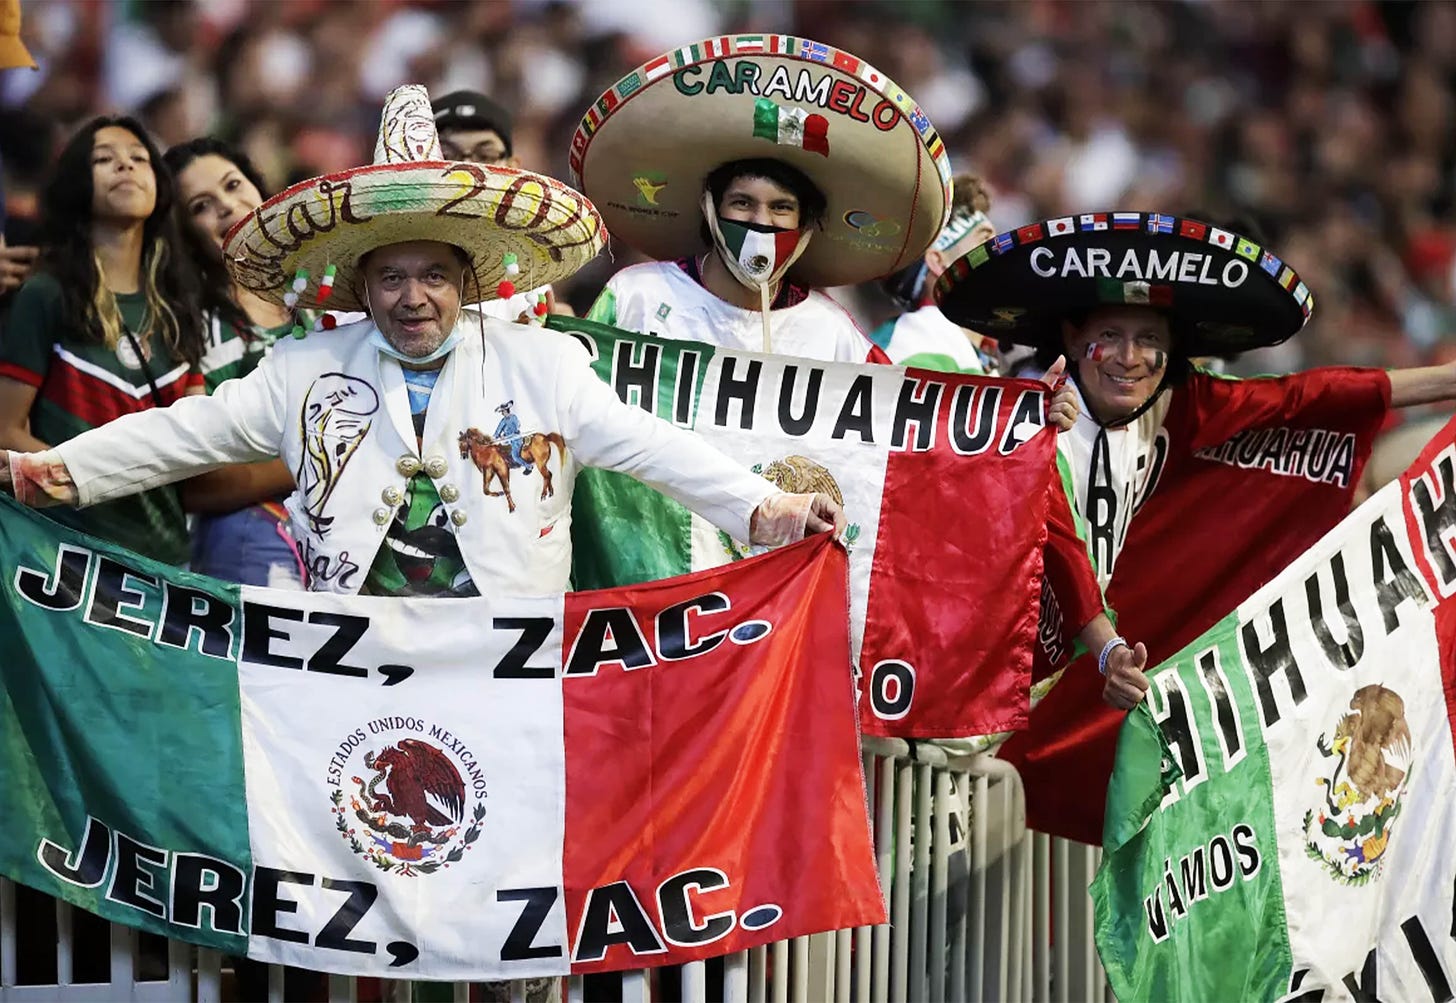 Mexican soccer fans are dressed up